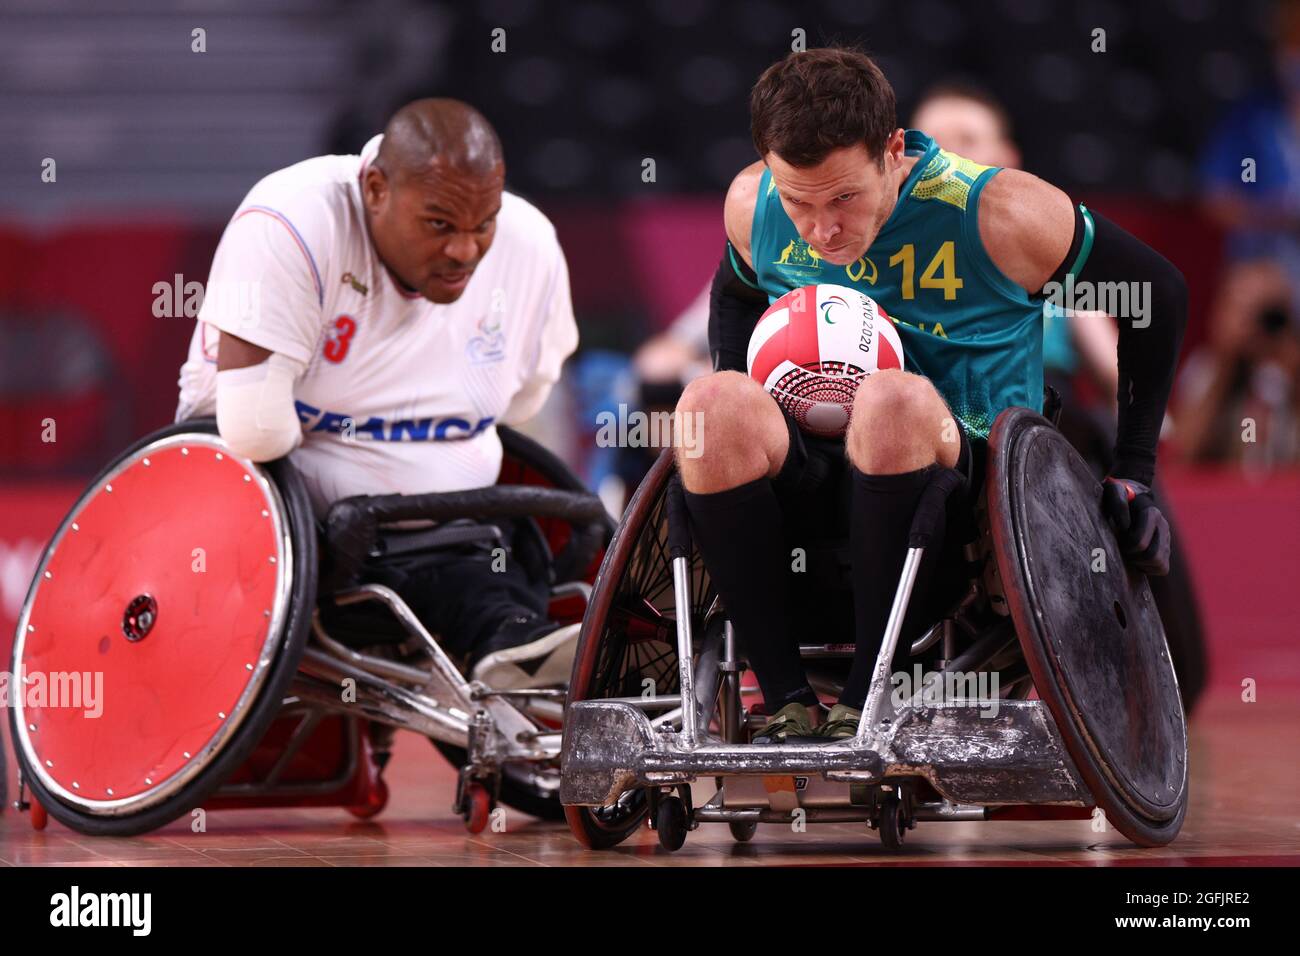 Tokyo 2020 Paralympic Games - Wheelchair Rugby - Mixed - Pool Phase A - France v Australia - Yoyogi National Tokyo, Japan - August 26, 2021. Andrew Edmondson of Australia